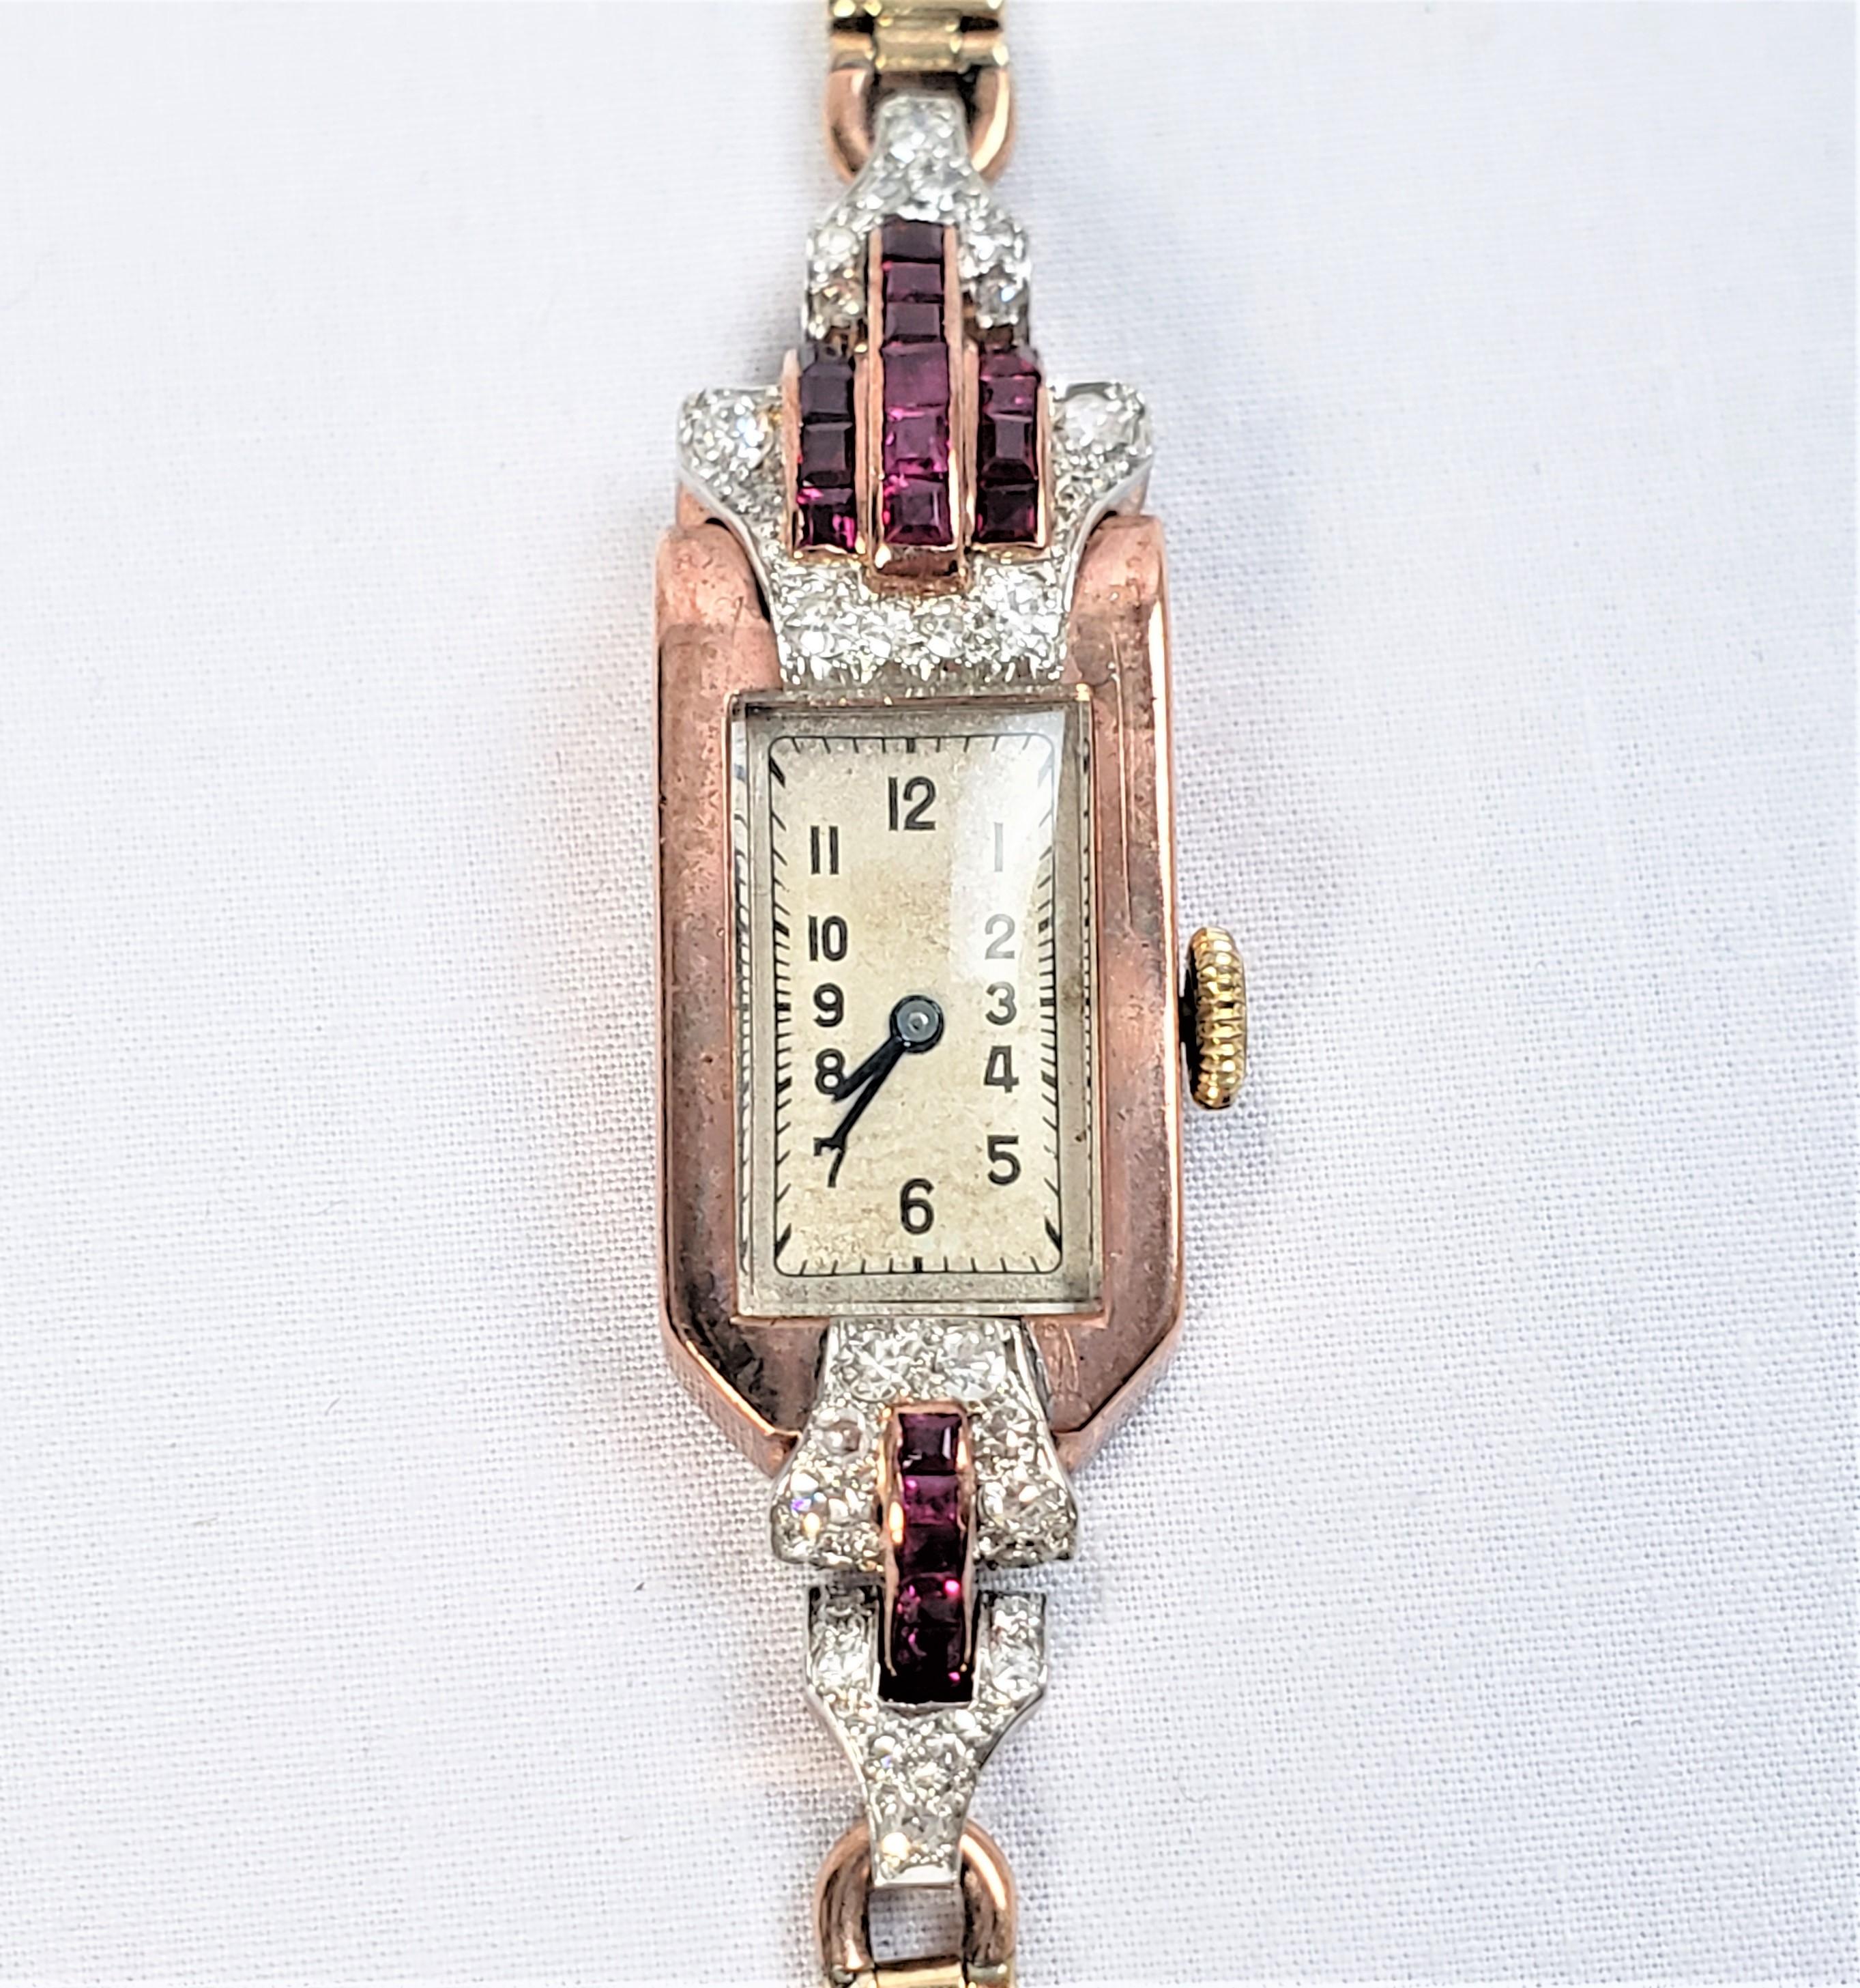 This antique ladies cocktail or evening watch is hallmarked as originating from England and dates to approximately 1920 and done in the period Art Deco style. The case and band are composed of 9 karat rose gold with diamond and synthetic ruby